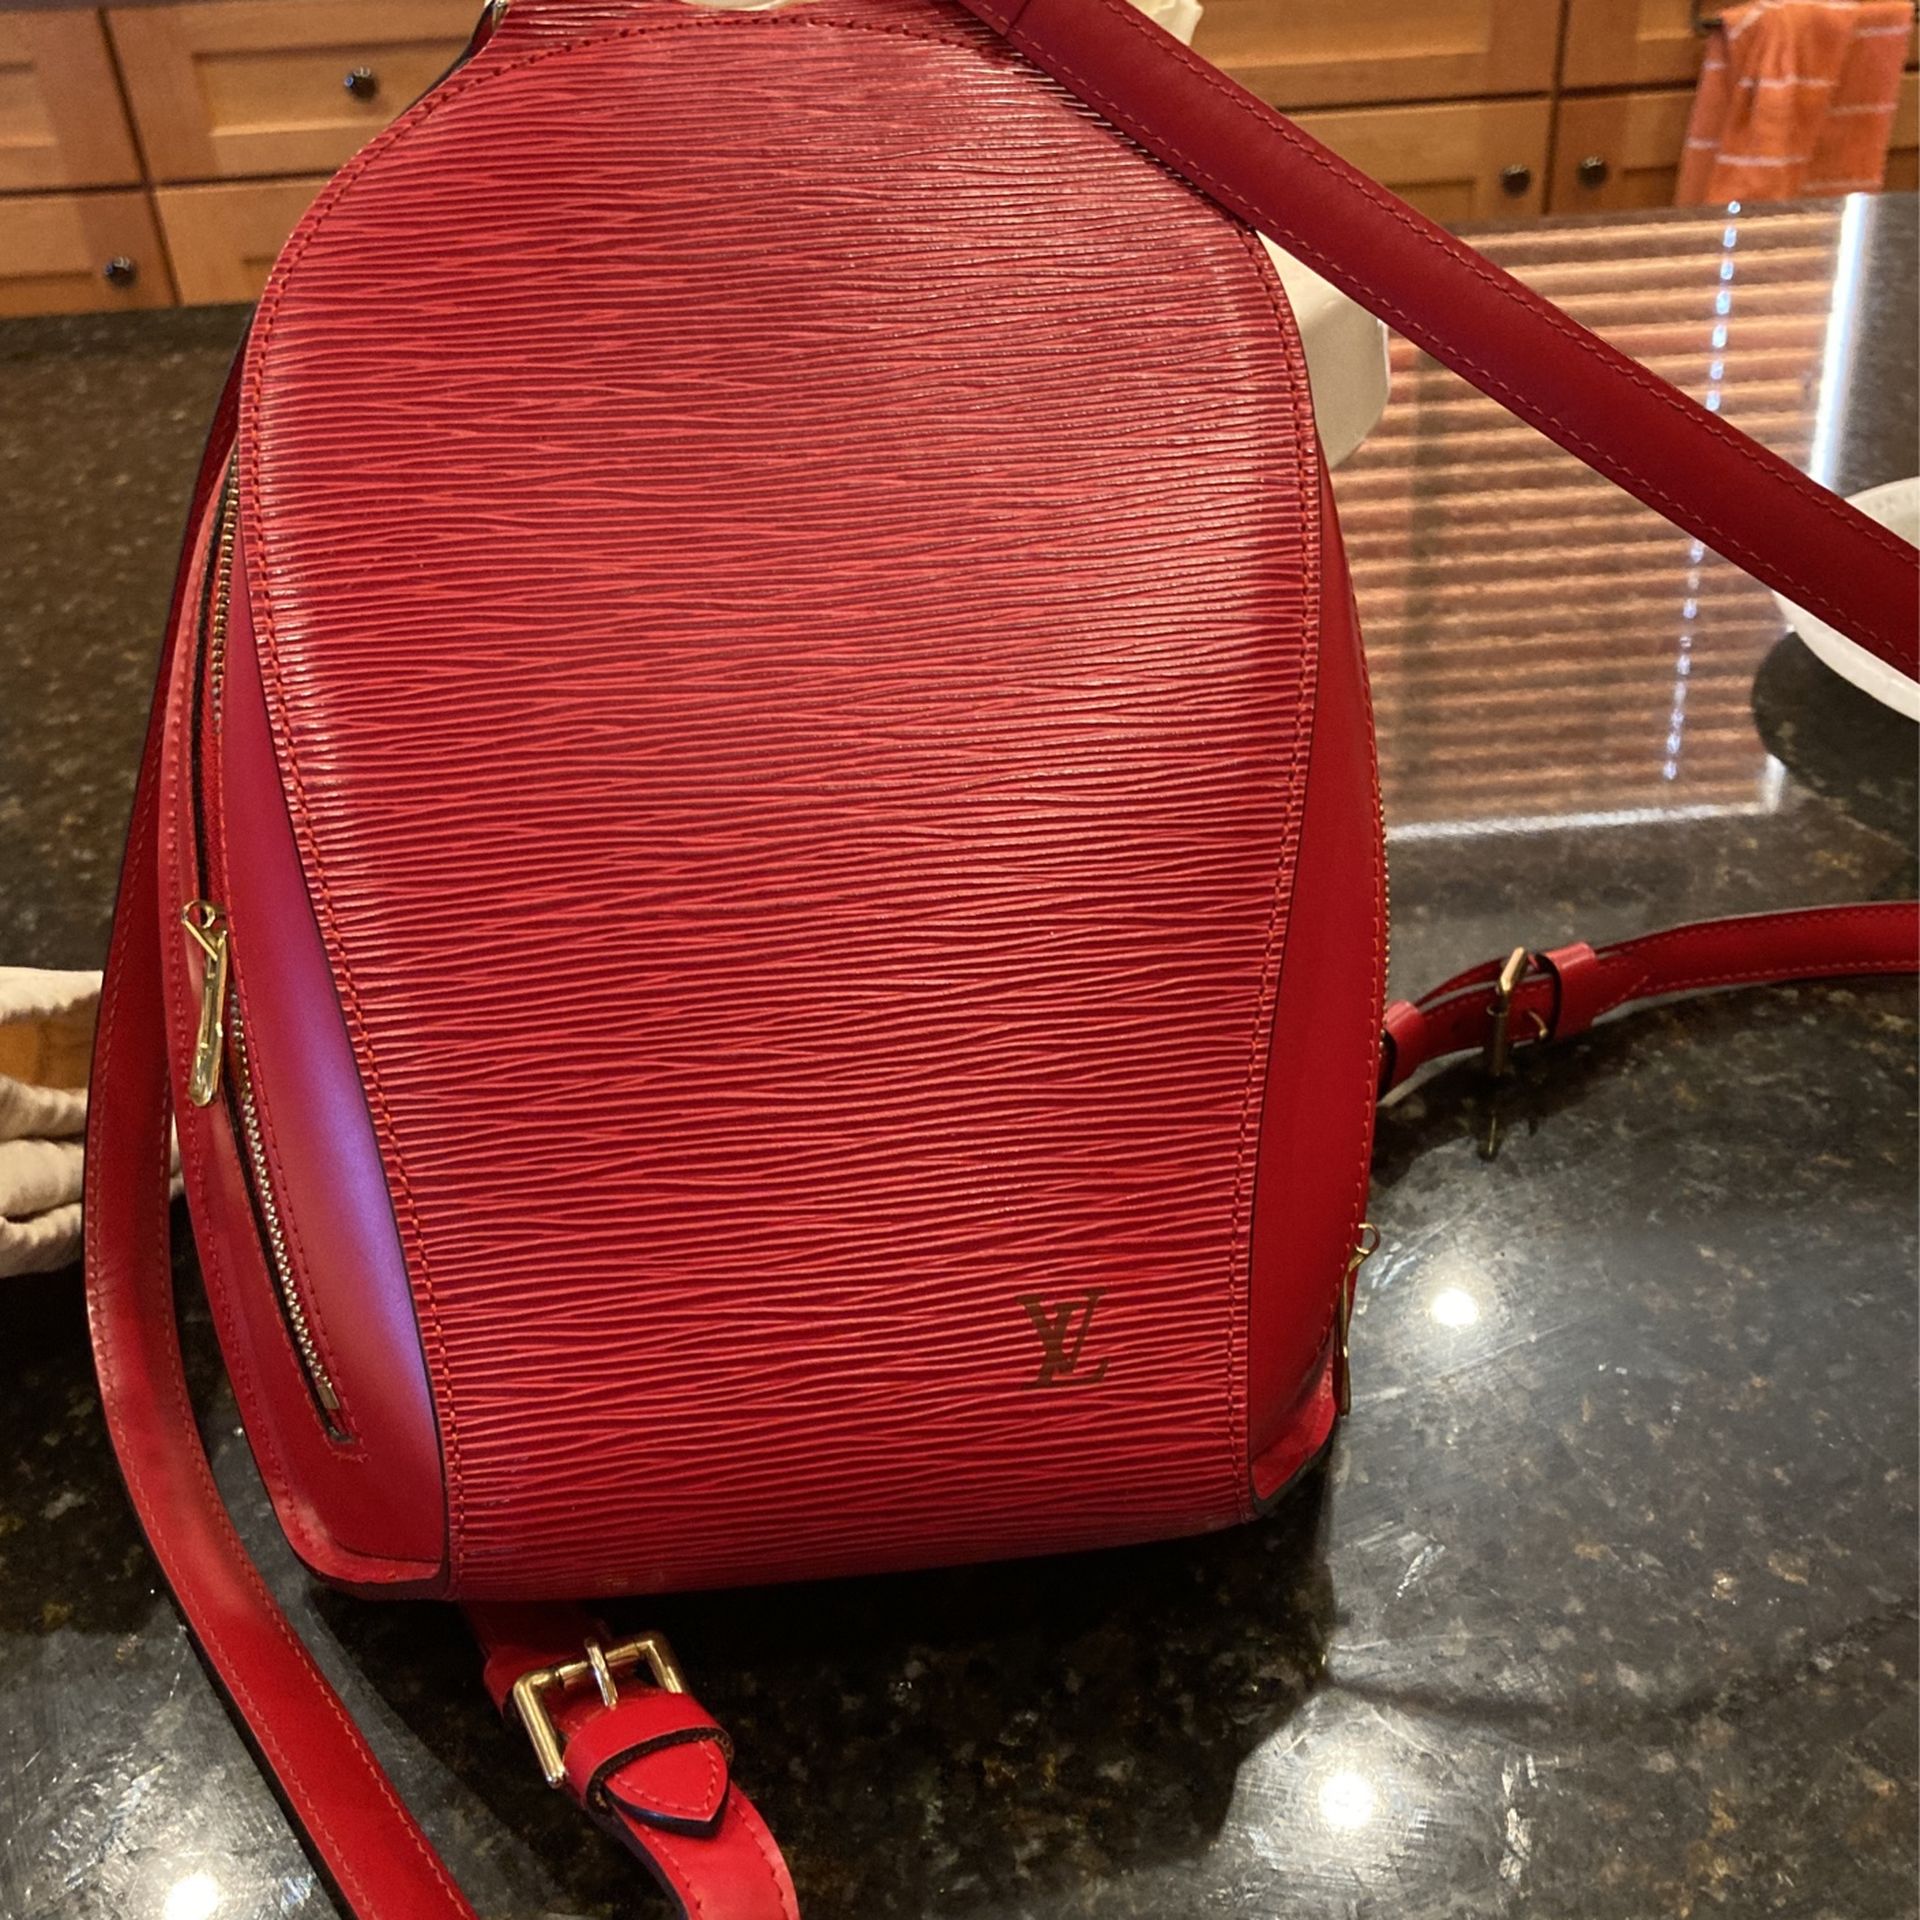 Authentic Louis Vuitton backpack